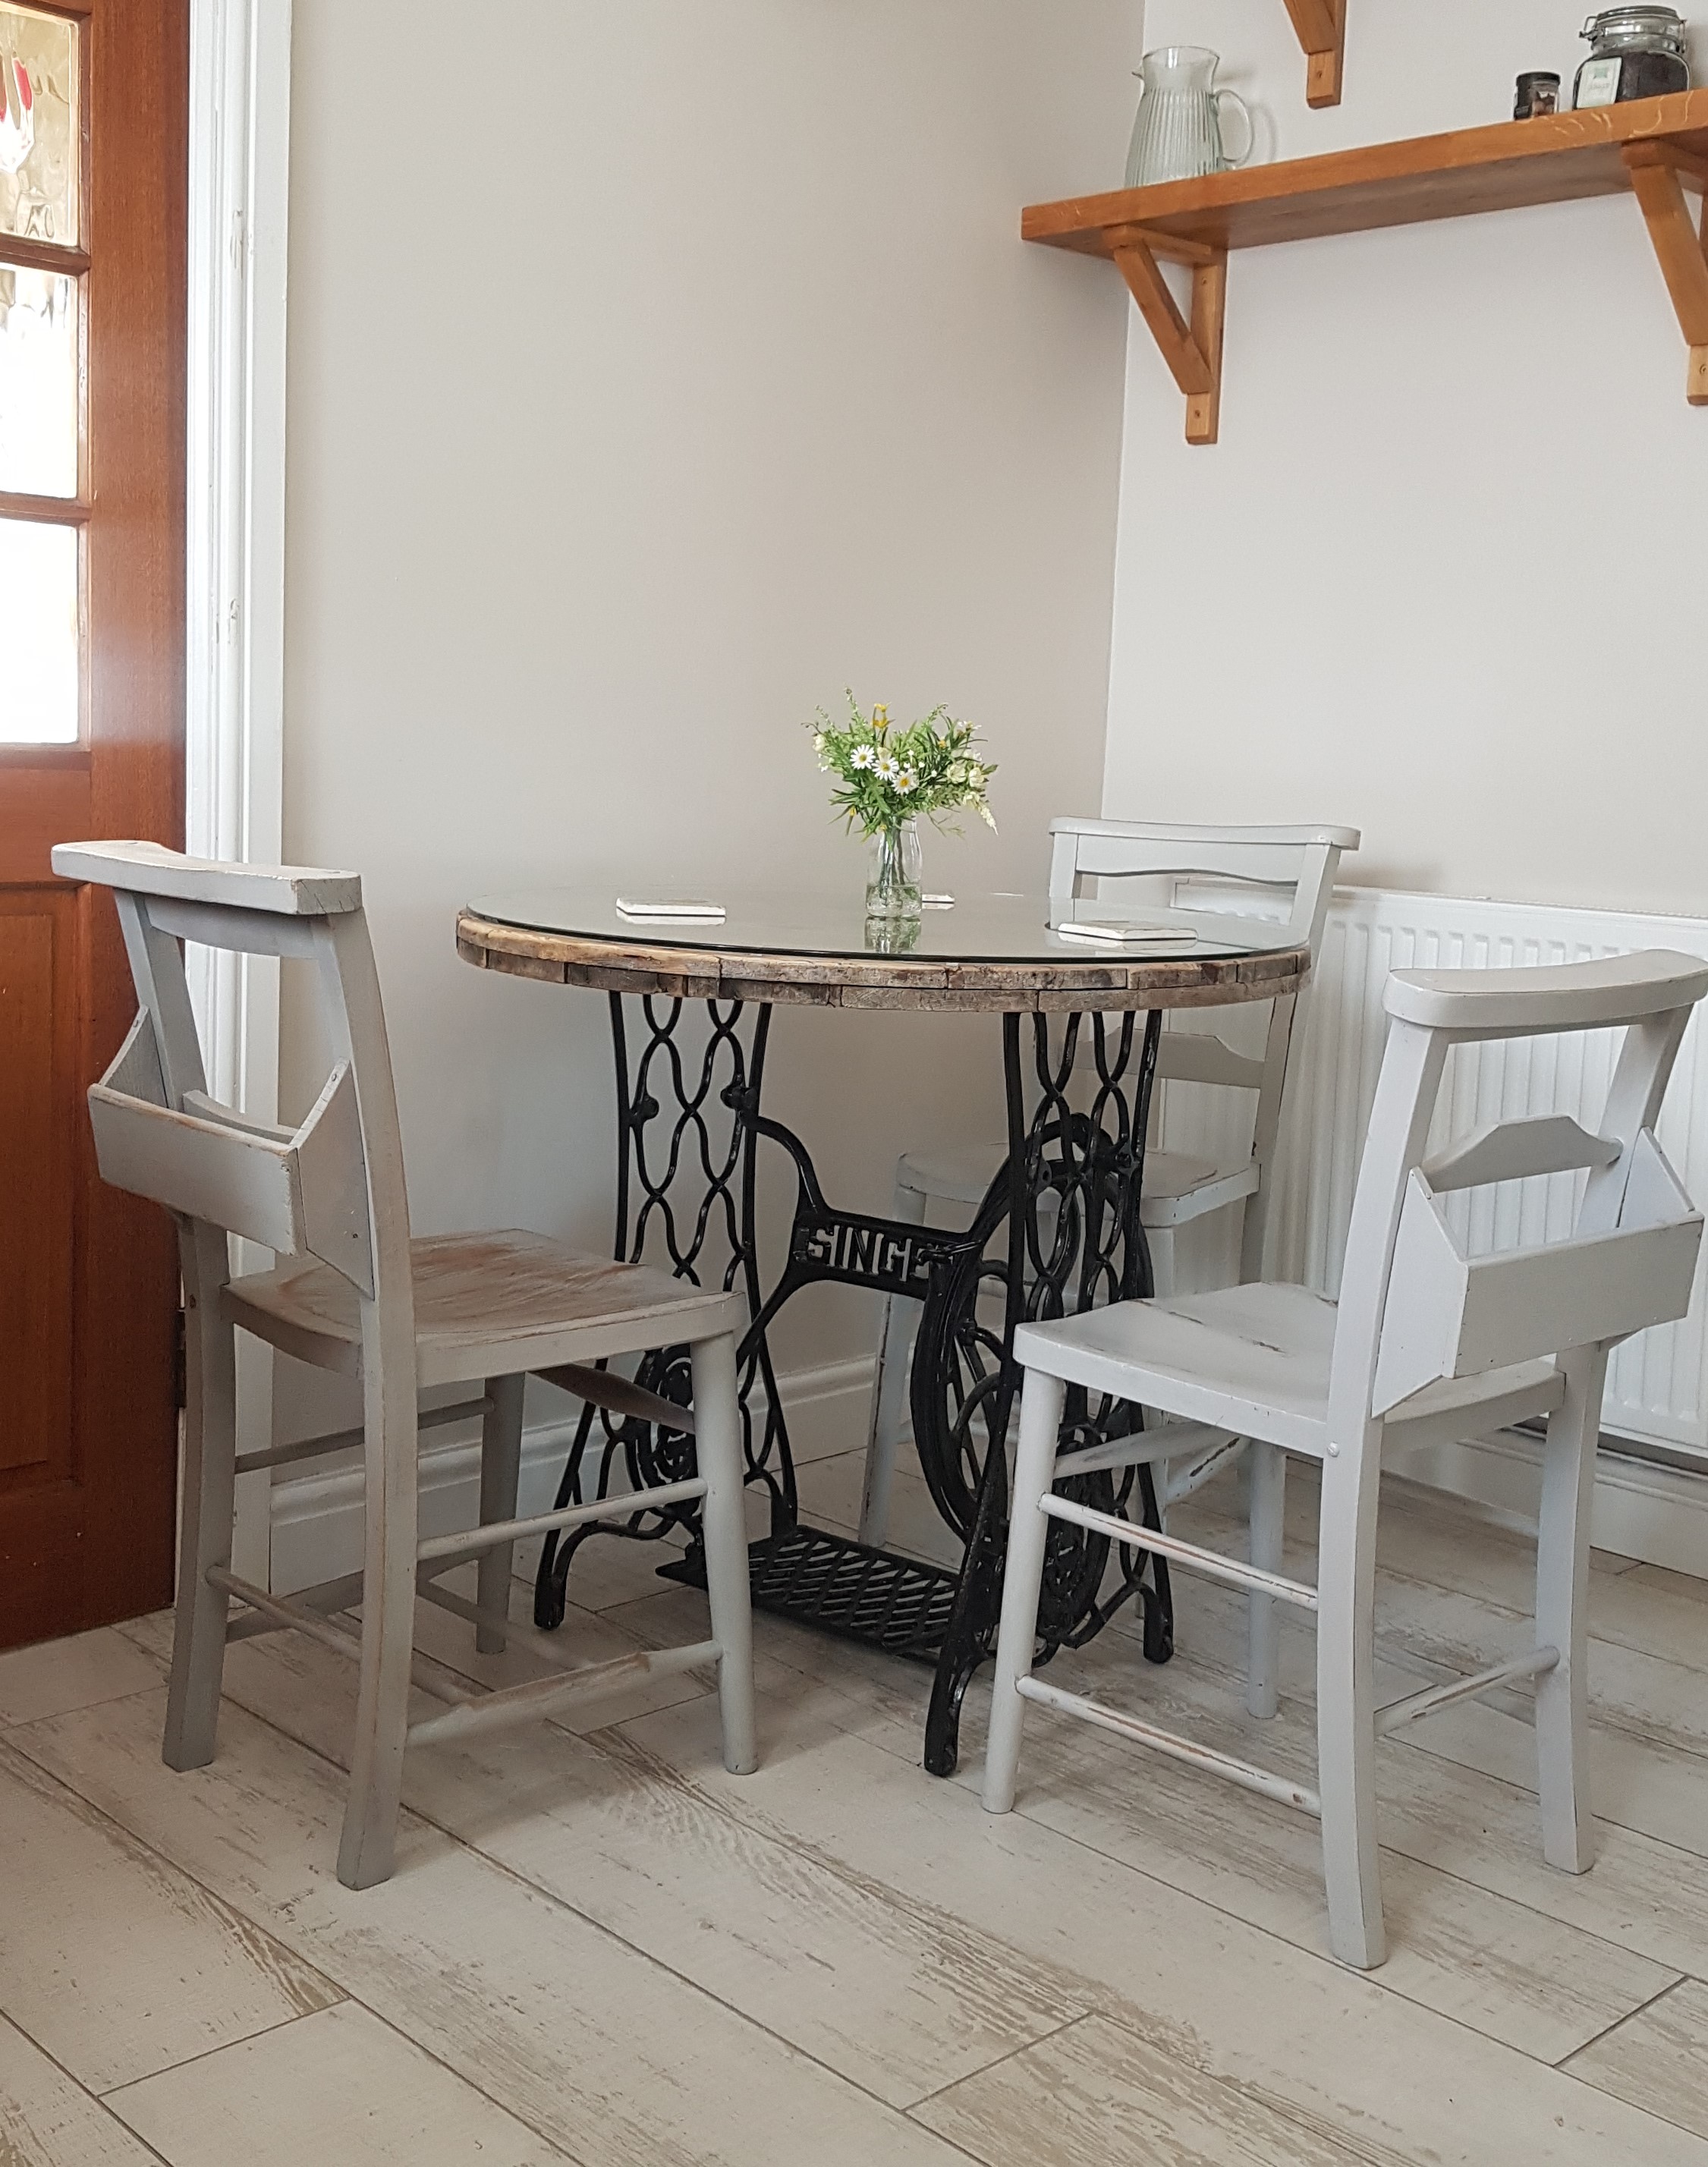 Painted Victorian Church chairs are perfect to use in traditional farmhouse kitchens. Old Church and Chapel chairs can be used a dining and kitchen seating